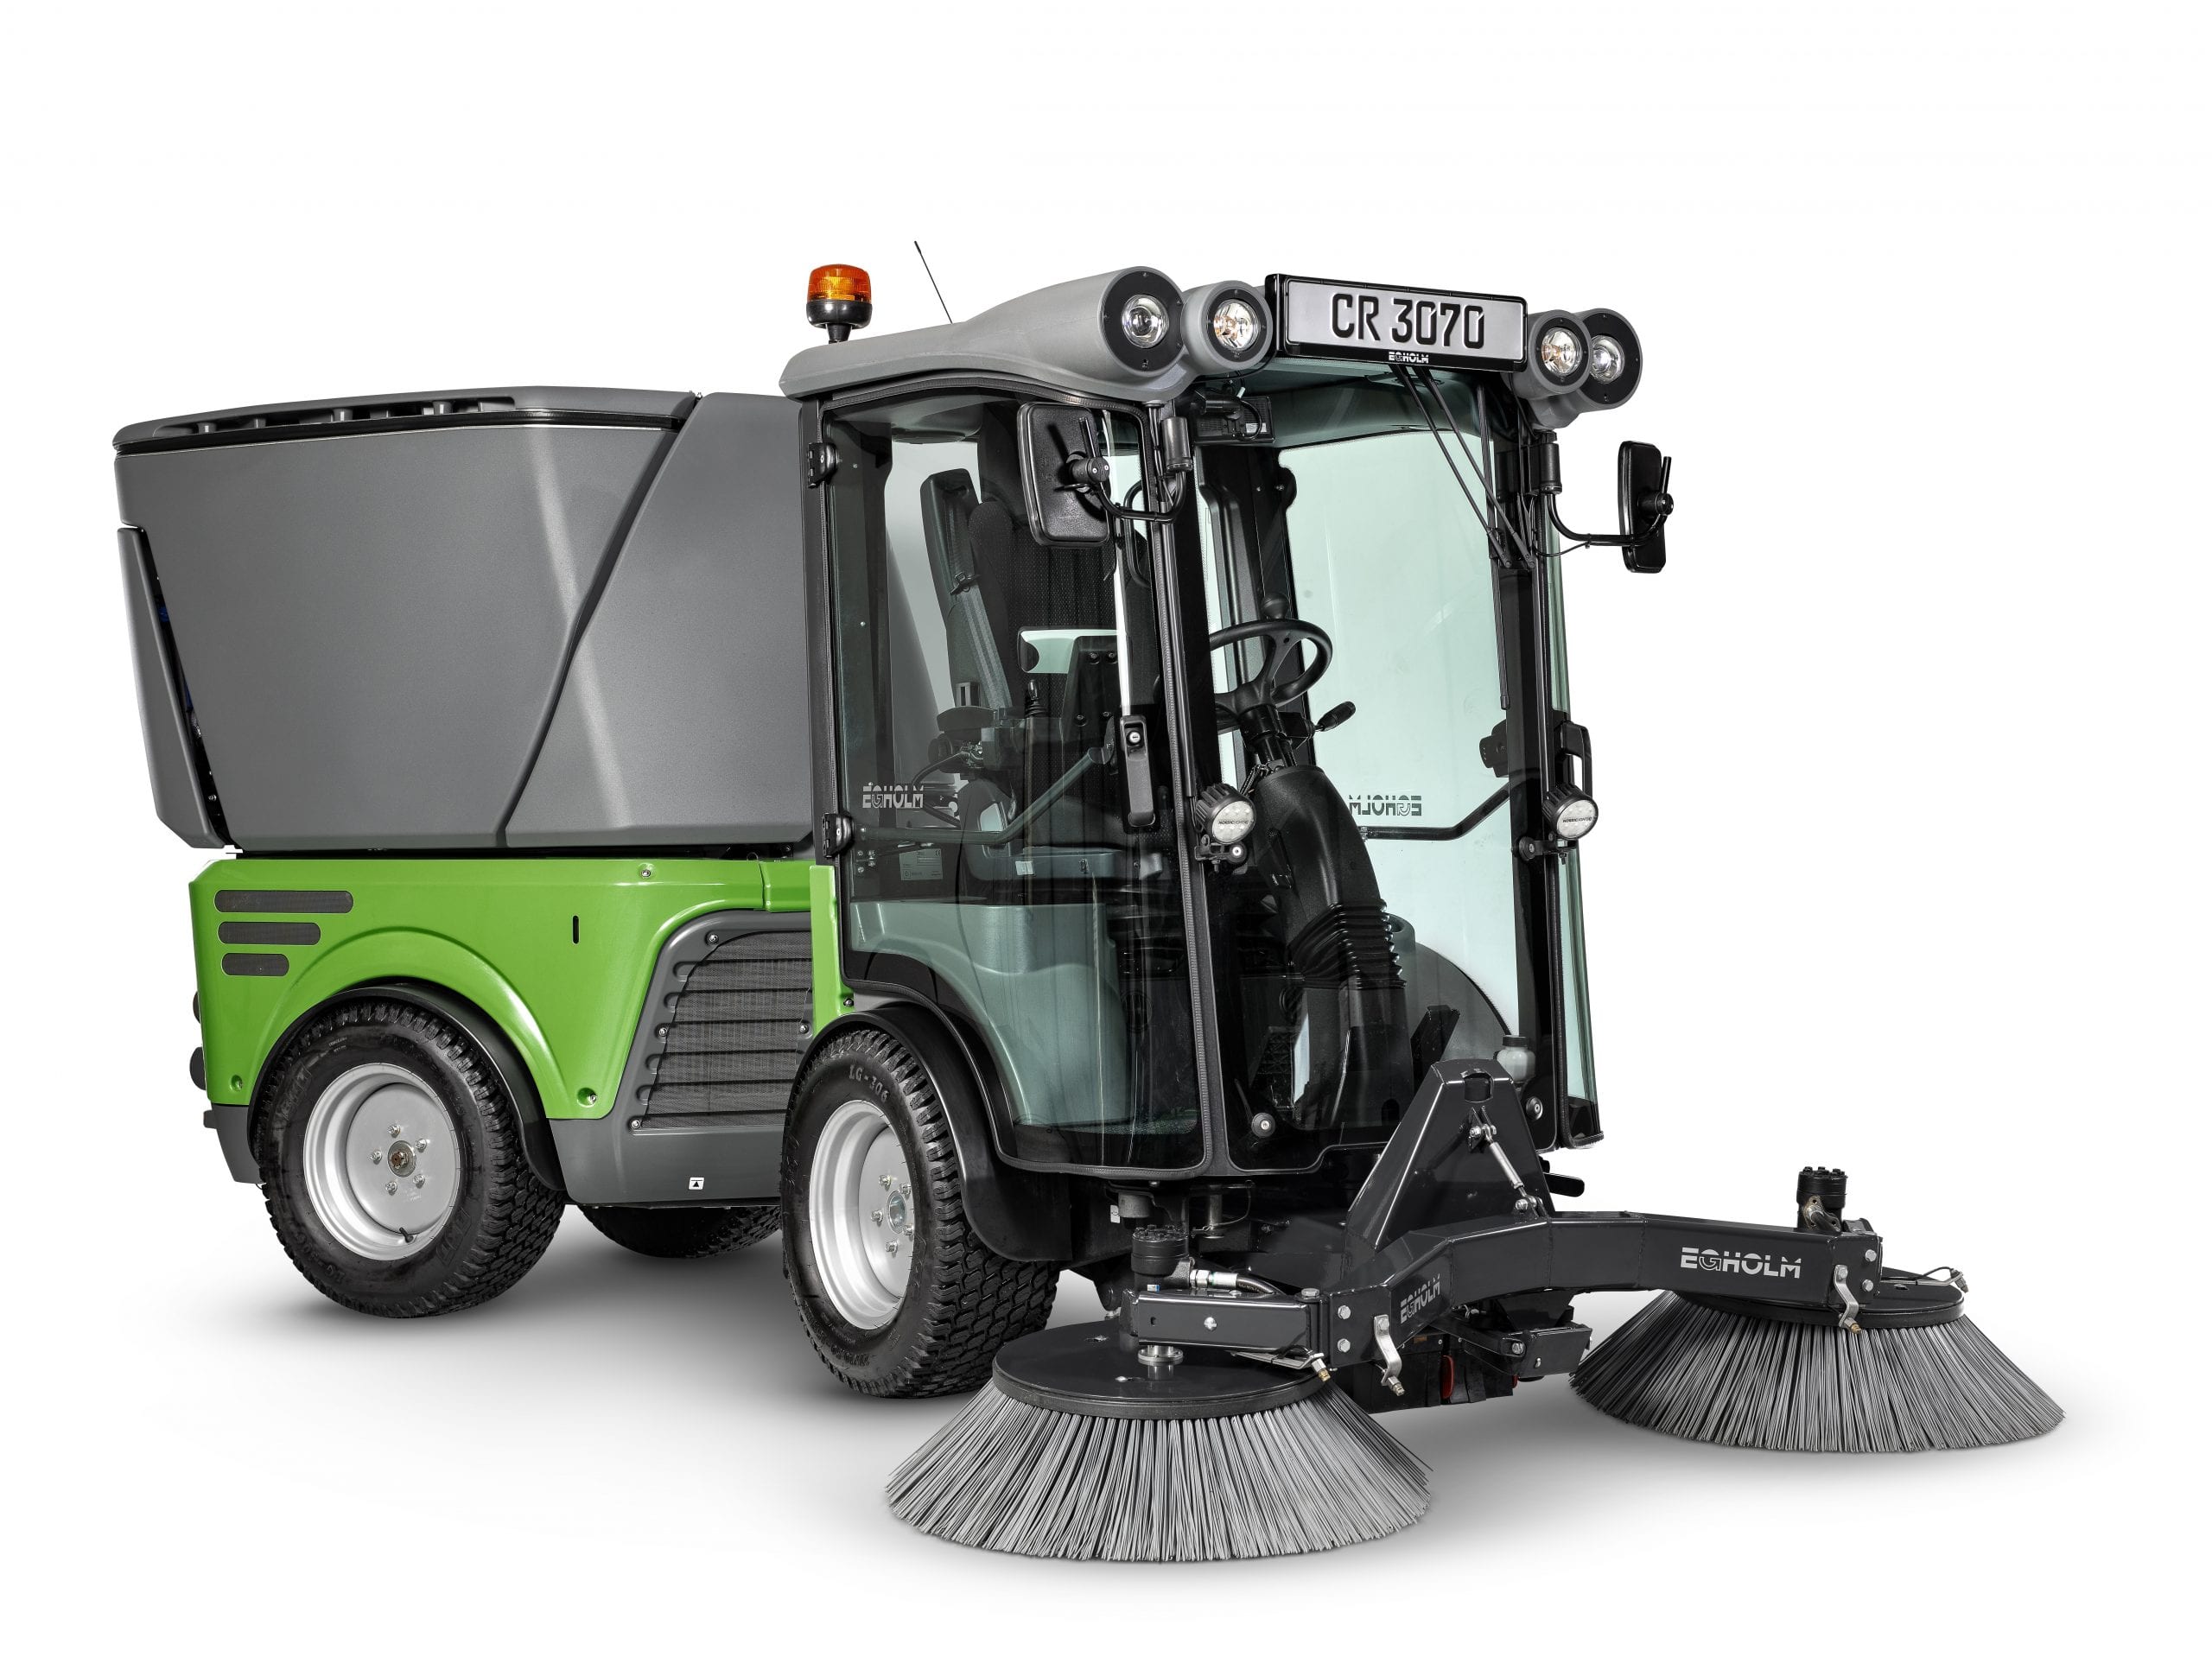 Egholm City Ranger 3070 Outdoor Sweeper for Sale in UK, in areas like Leicester, Northampton, Nottingham, Birmingham, Derby, Warwick, West Midlands and East Midlands (3)